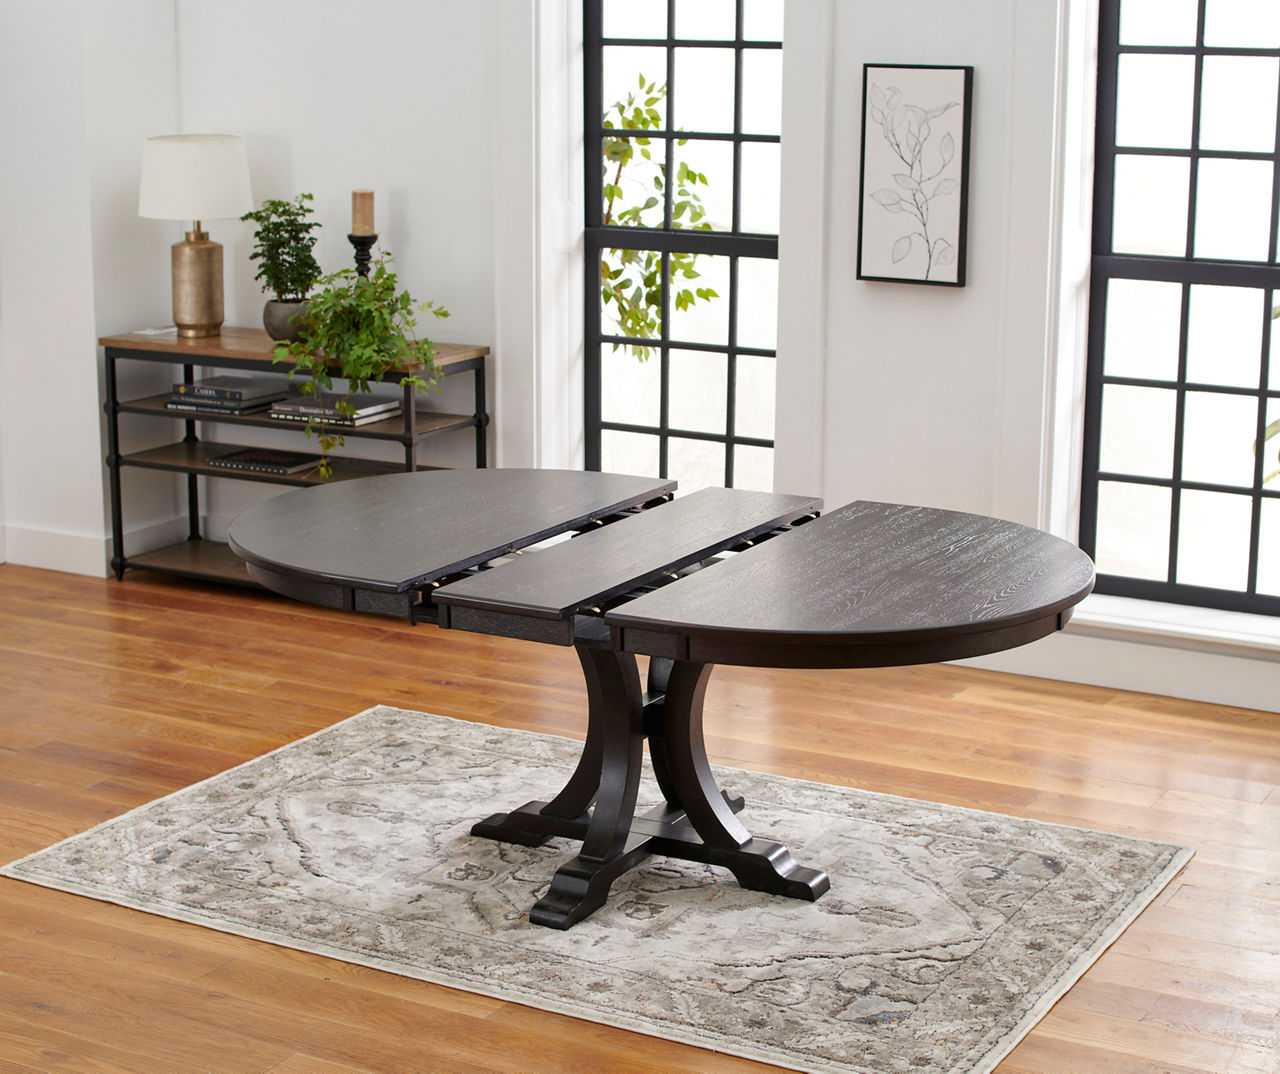 Broyhill Nero Oval Dining Table Big Lots